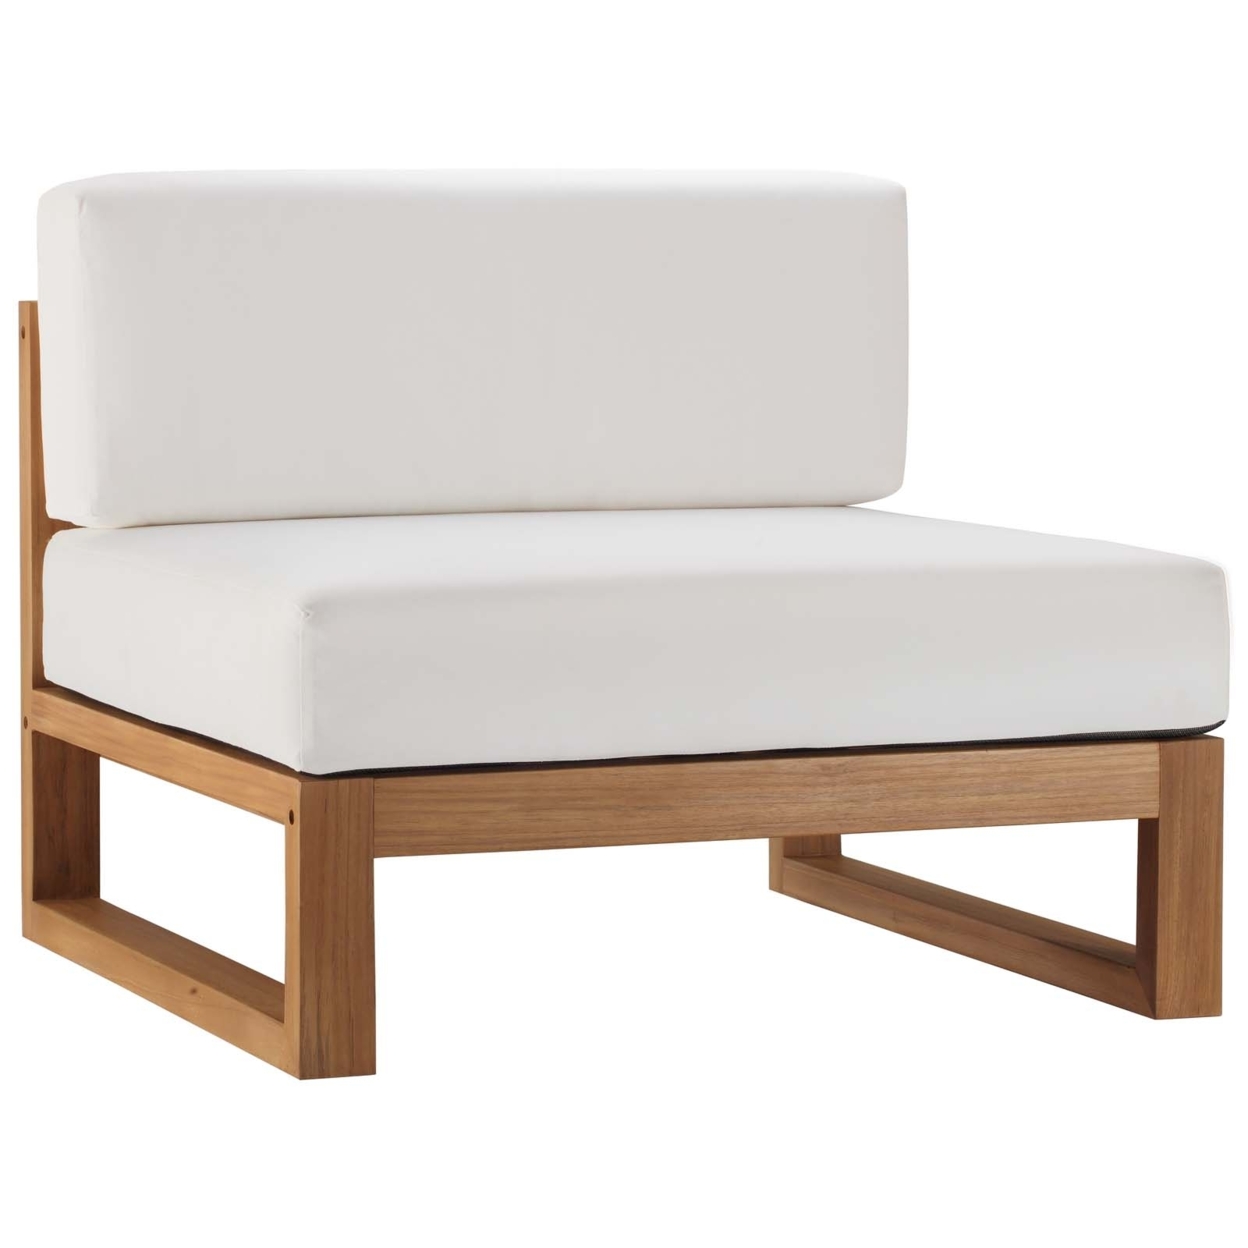 Upland Outdoor Patio Teak Wood Armless Chair, Natural White